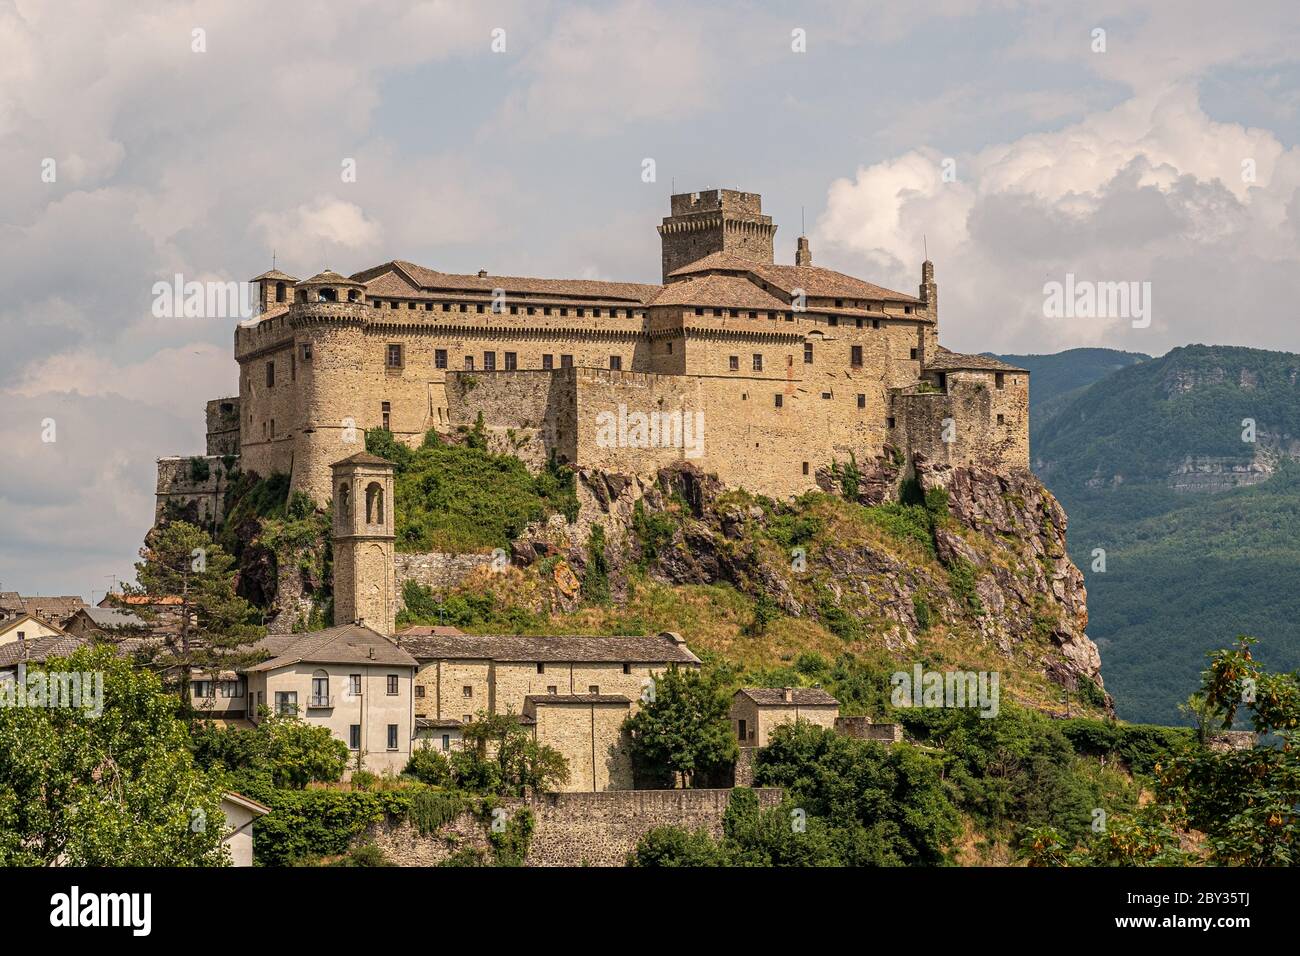 The castle of Bardi in a cloudy day. Parma province, Emilia and Romagna, Italy. Stock Photo